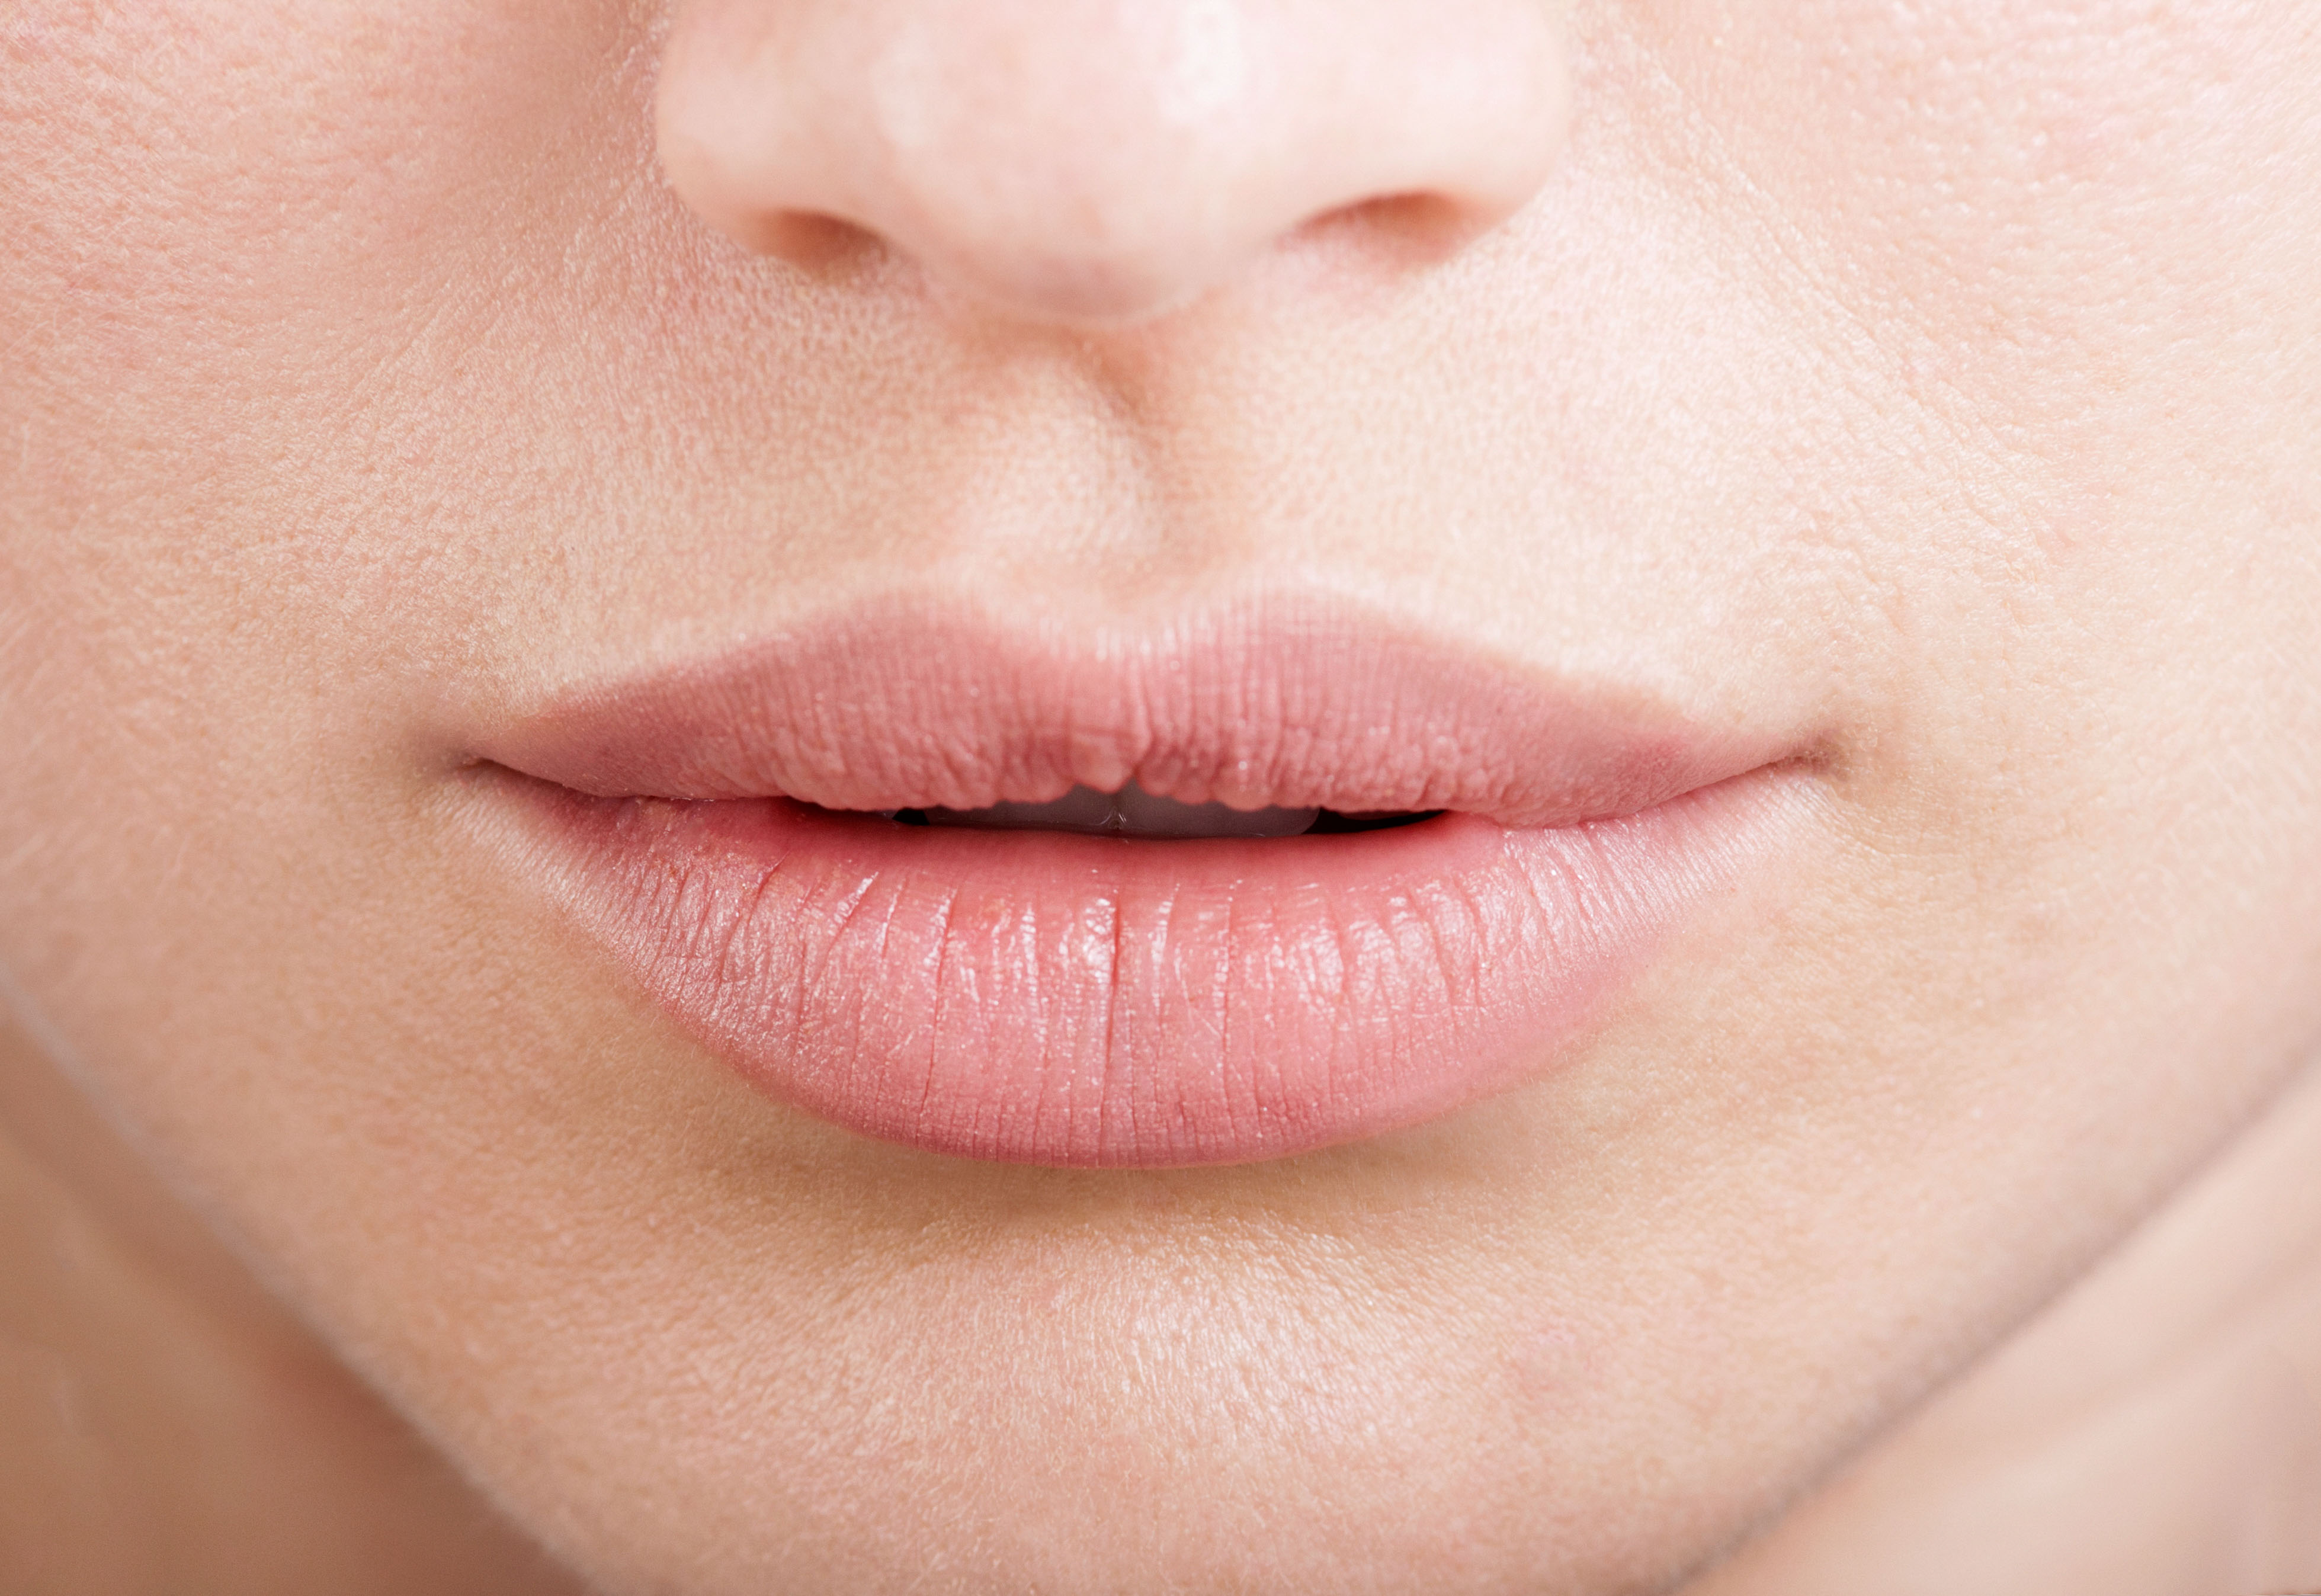 Hylauronic acid or botox female lips. Beauty and healthcare concept